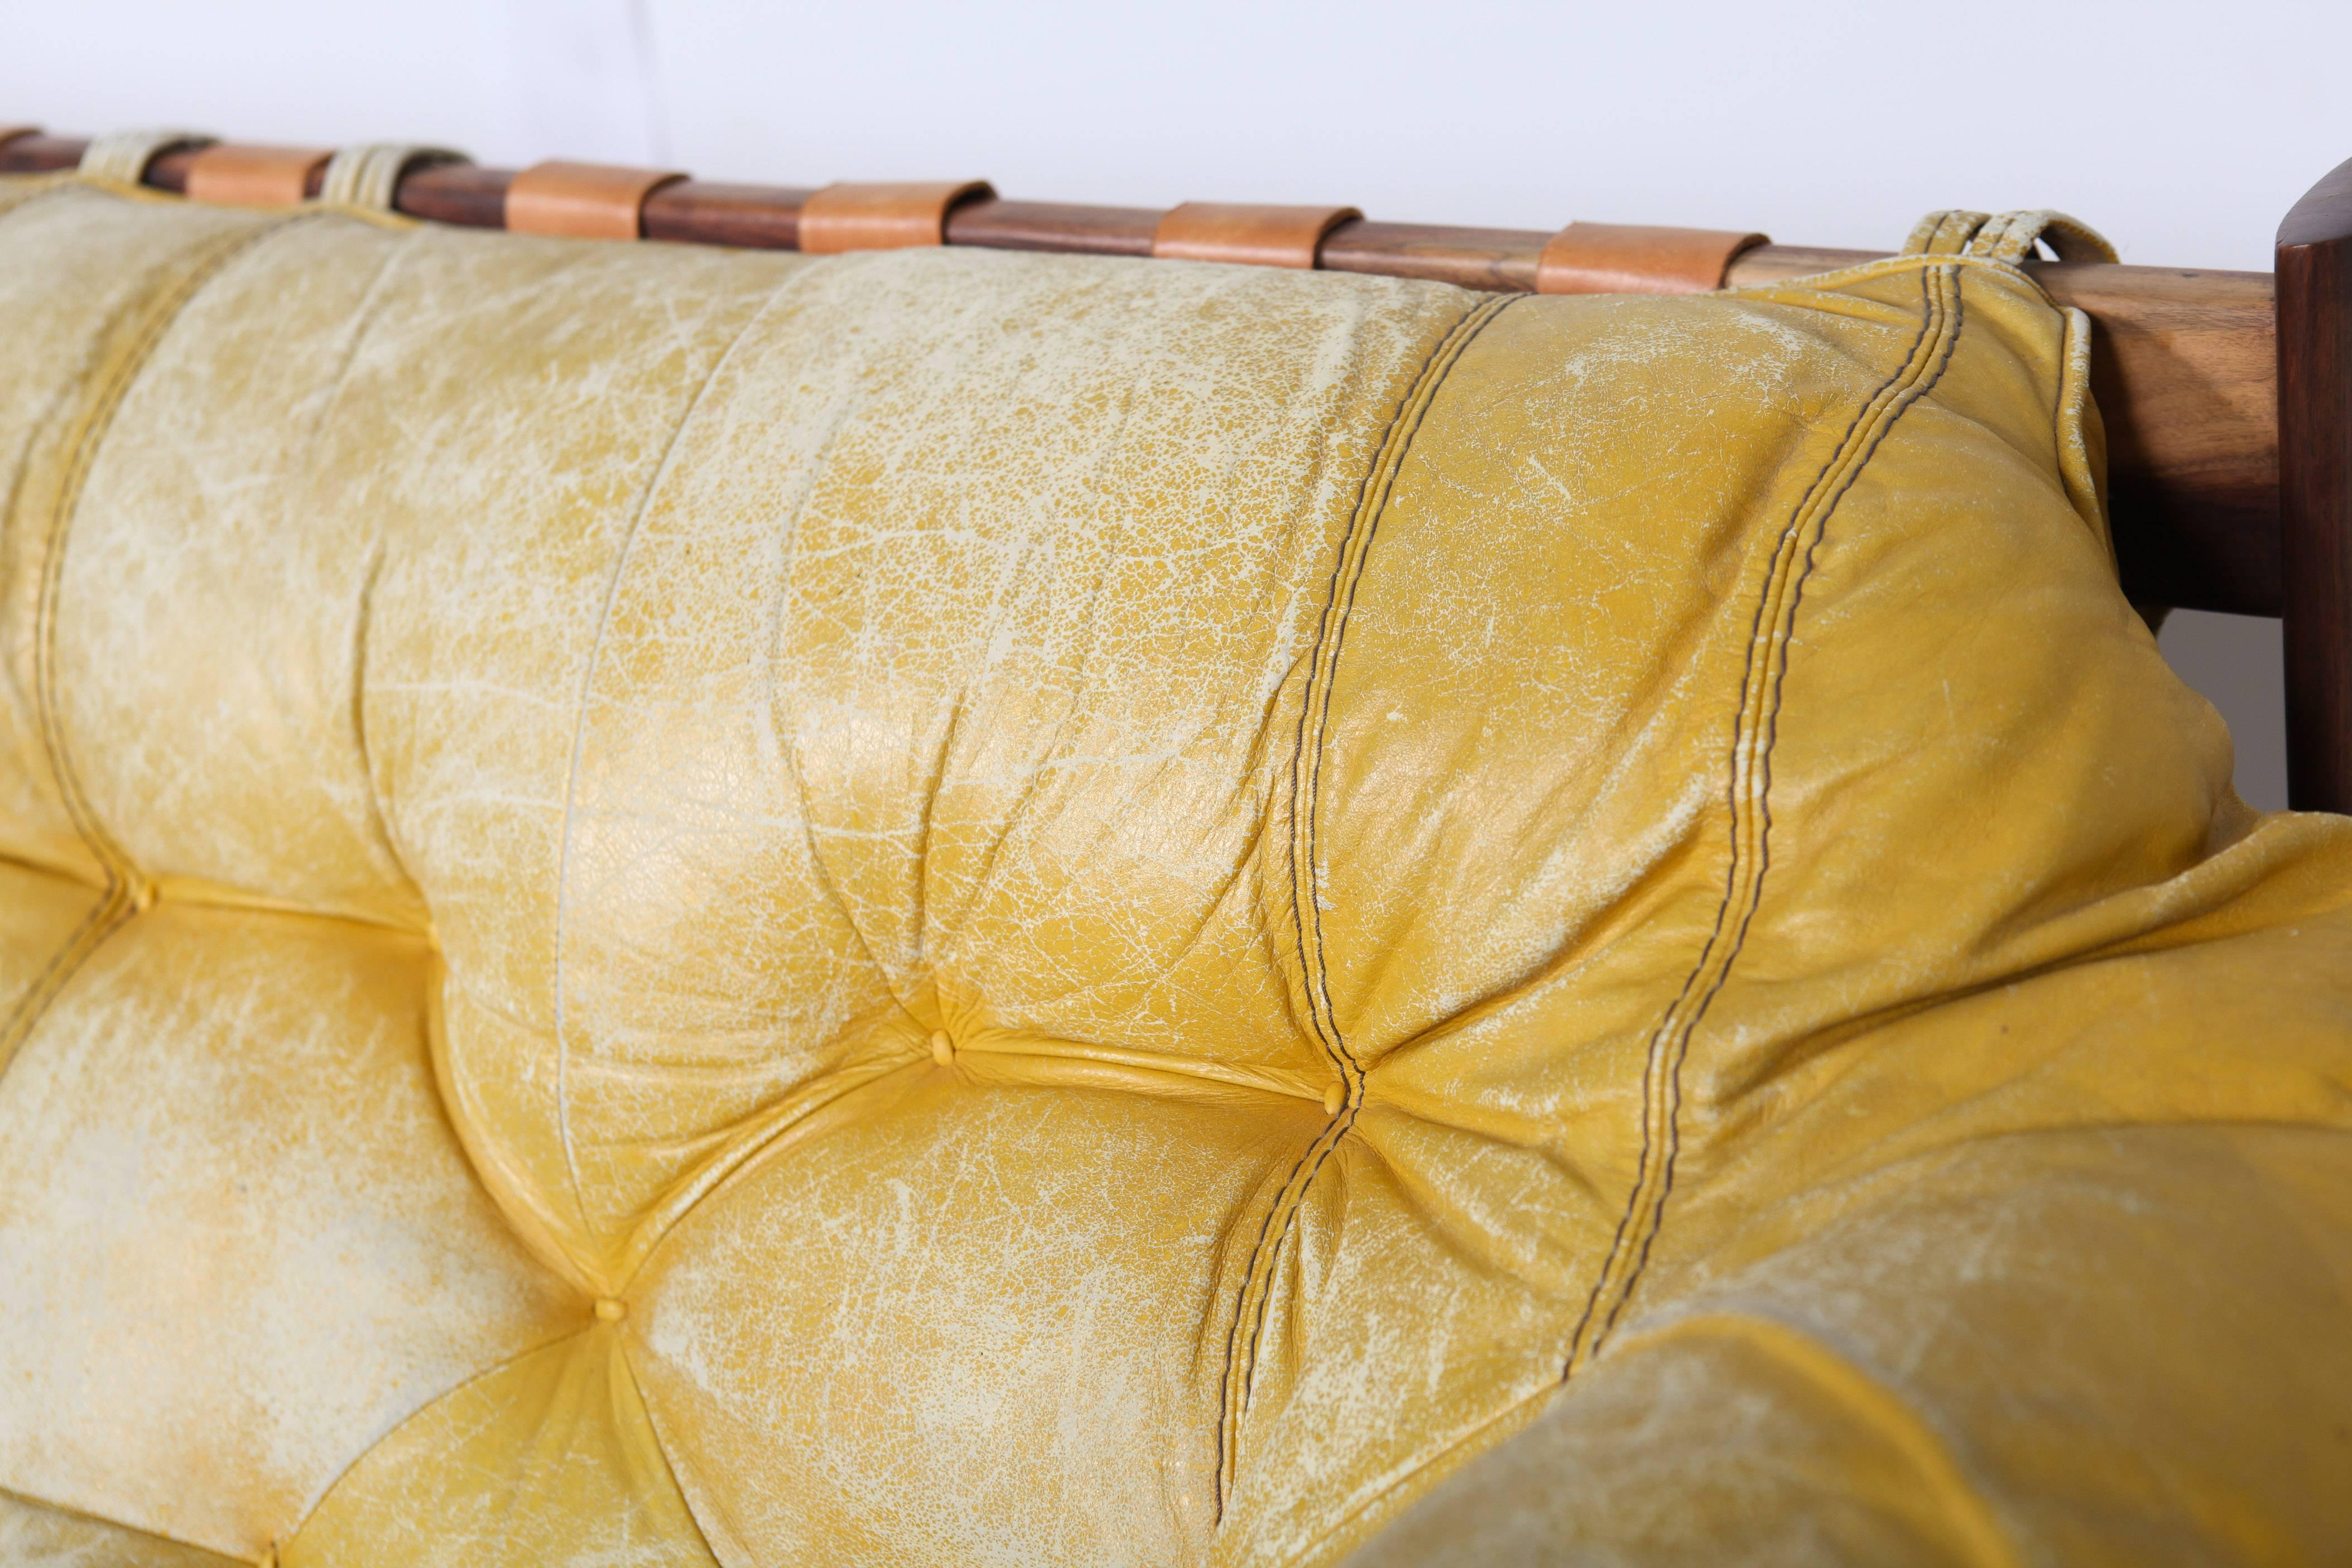 Brazilian Percival Lafer Rosewood, and Distressed, Tufted, Yellow Leather, Sofa, Brazil